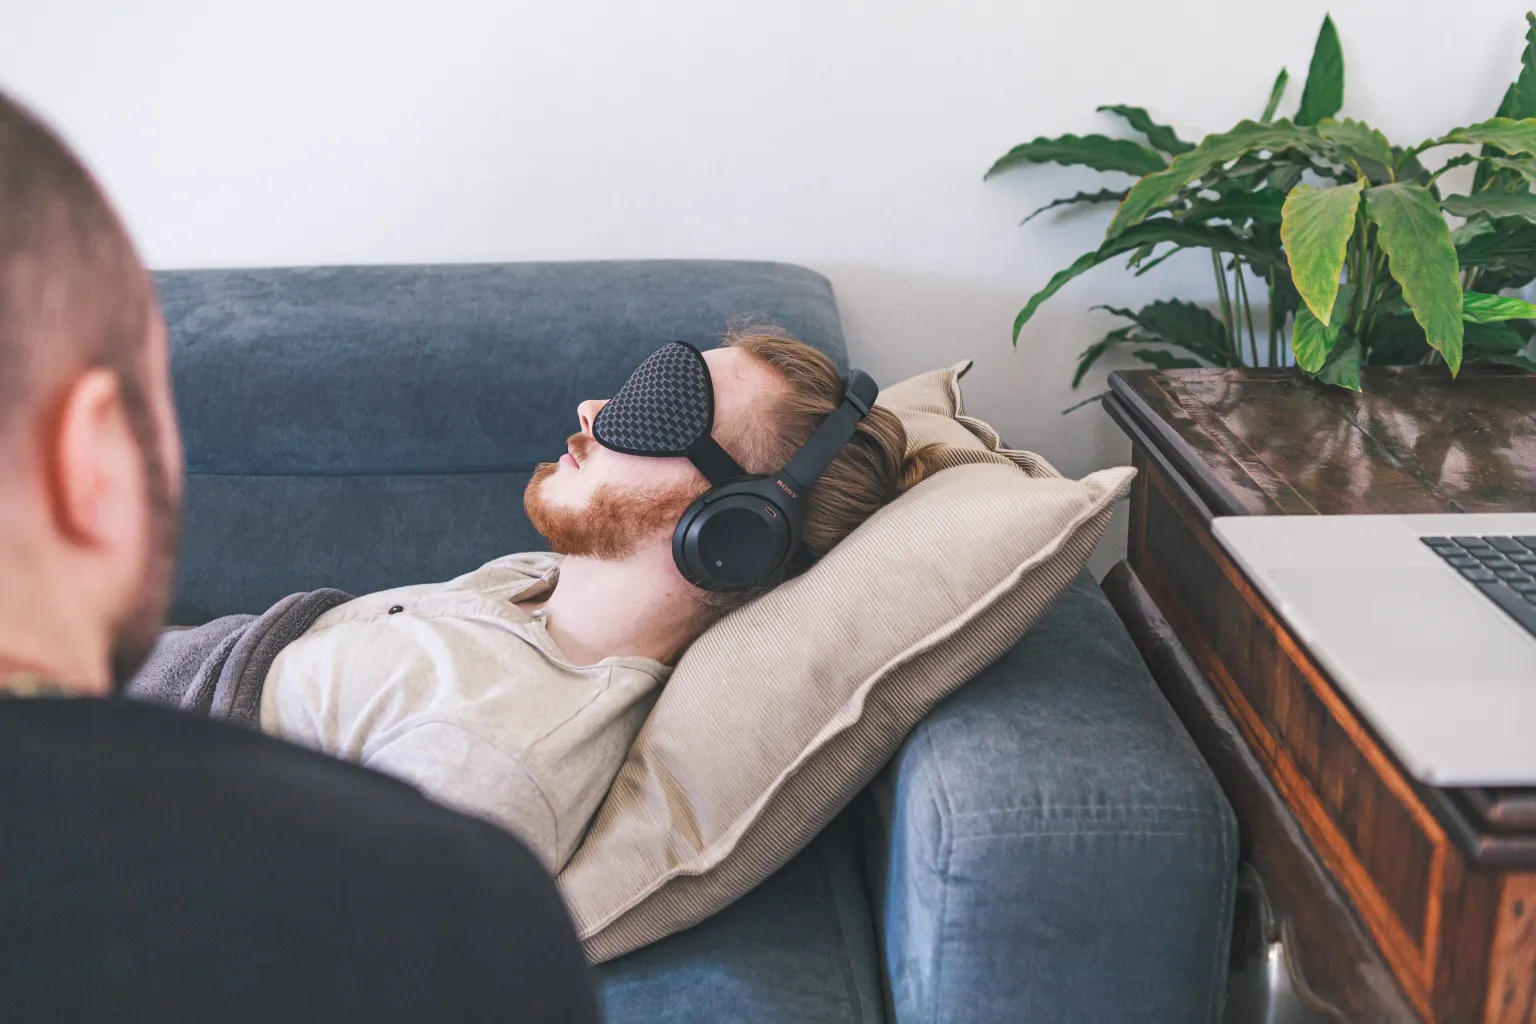 While wearing an eye mask, each individual listens to a carefully designed series of musical programs and receives personalized support from trained psychotherapists.